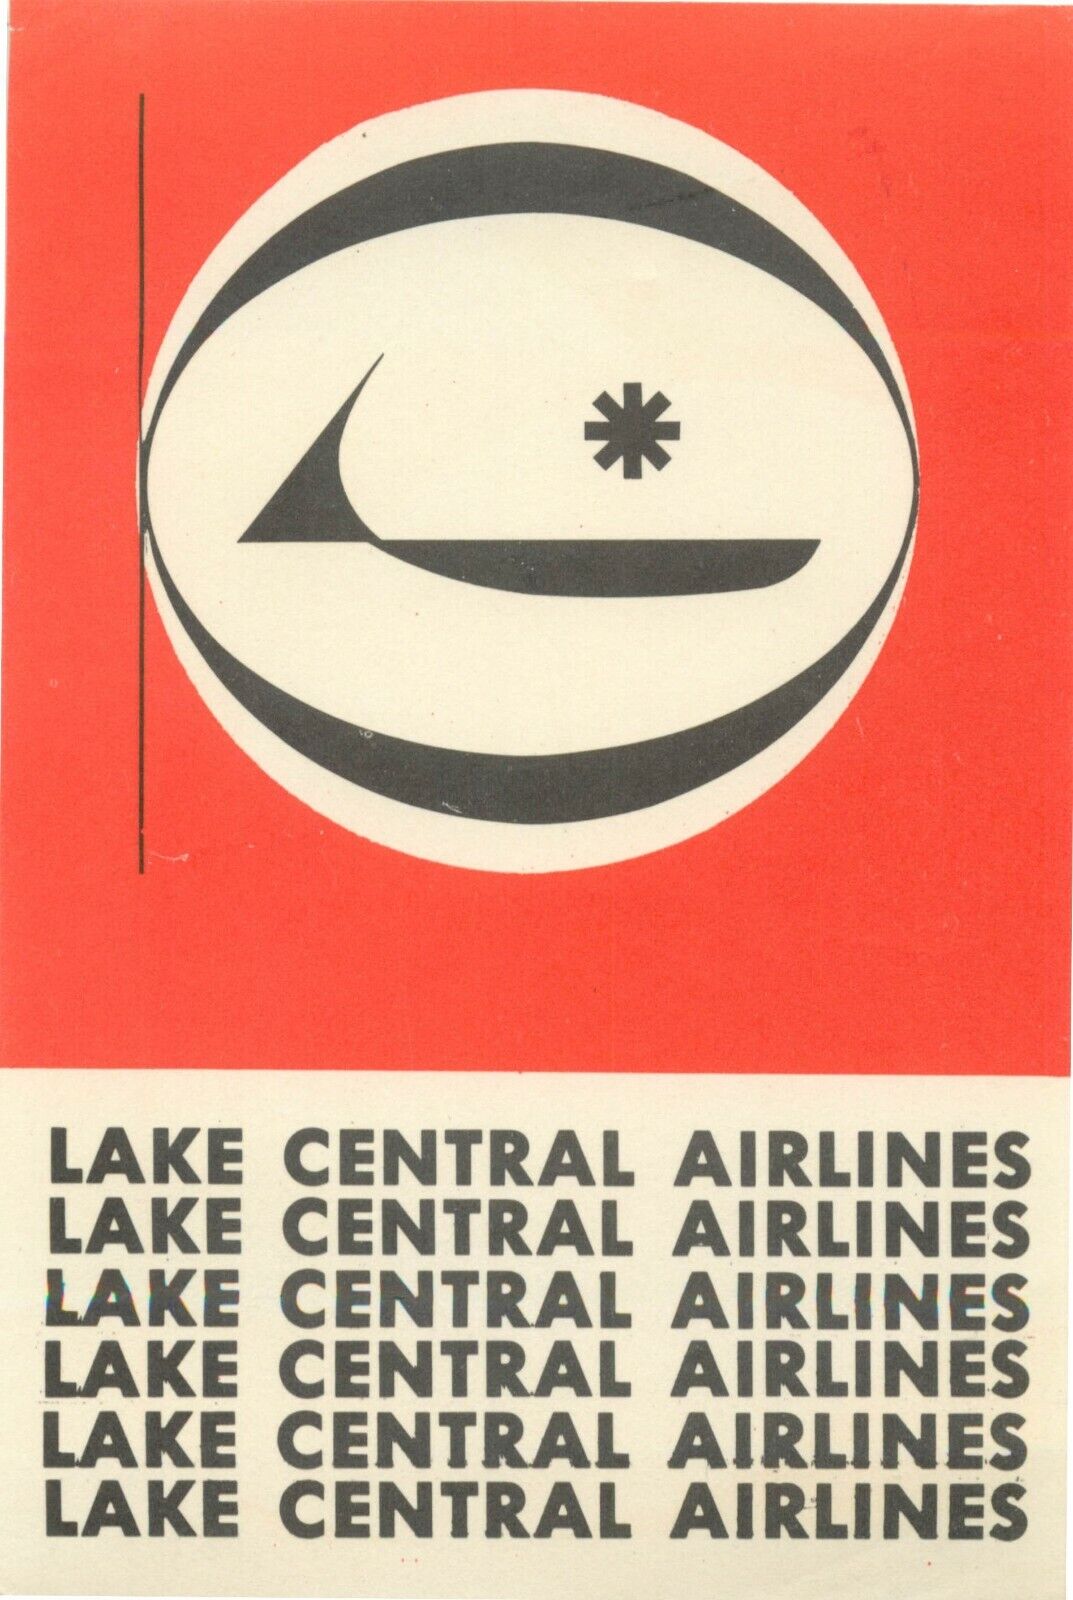 LAKE CENTRAL AIRLINES - Great Old Airline Luggage Label, c. 1955